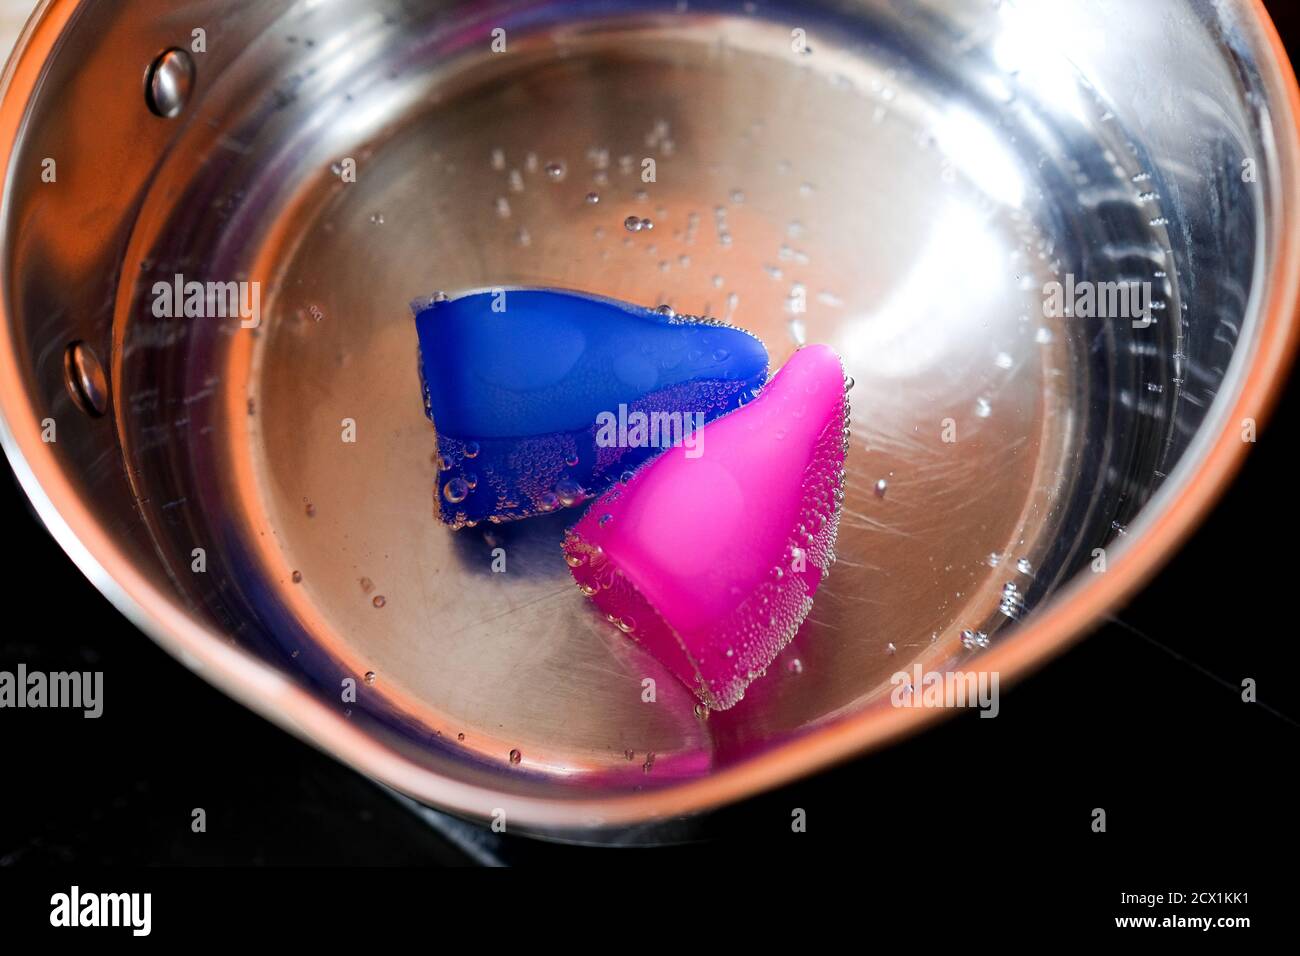 Menstrual cup in hot water. Boil before first use. Stock Photo